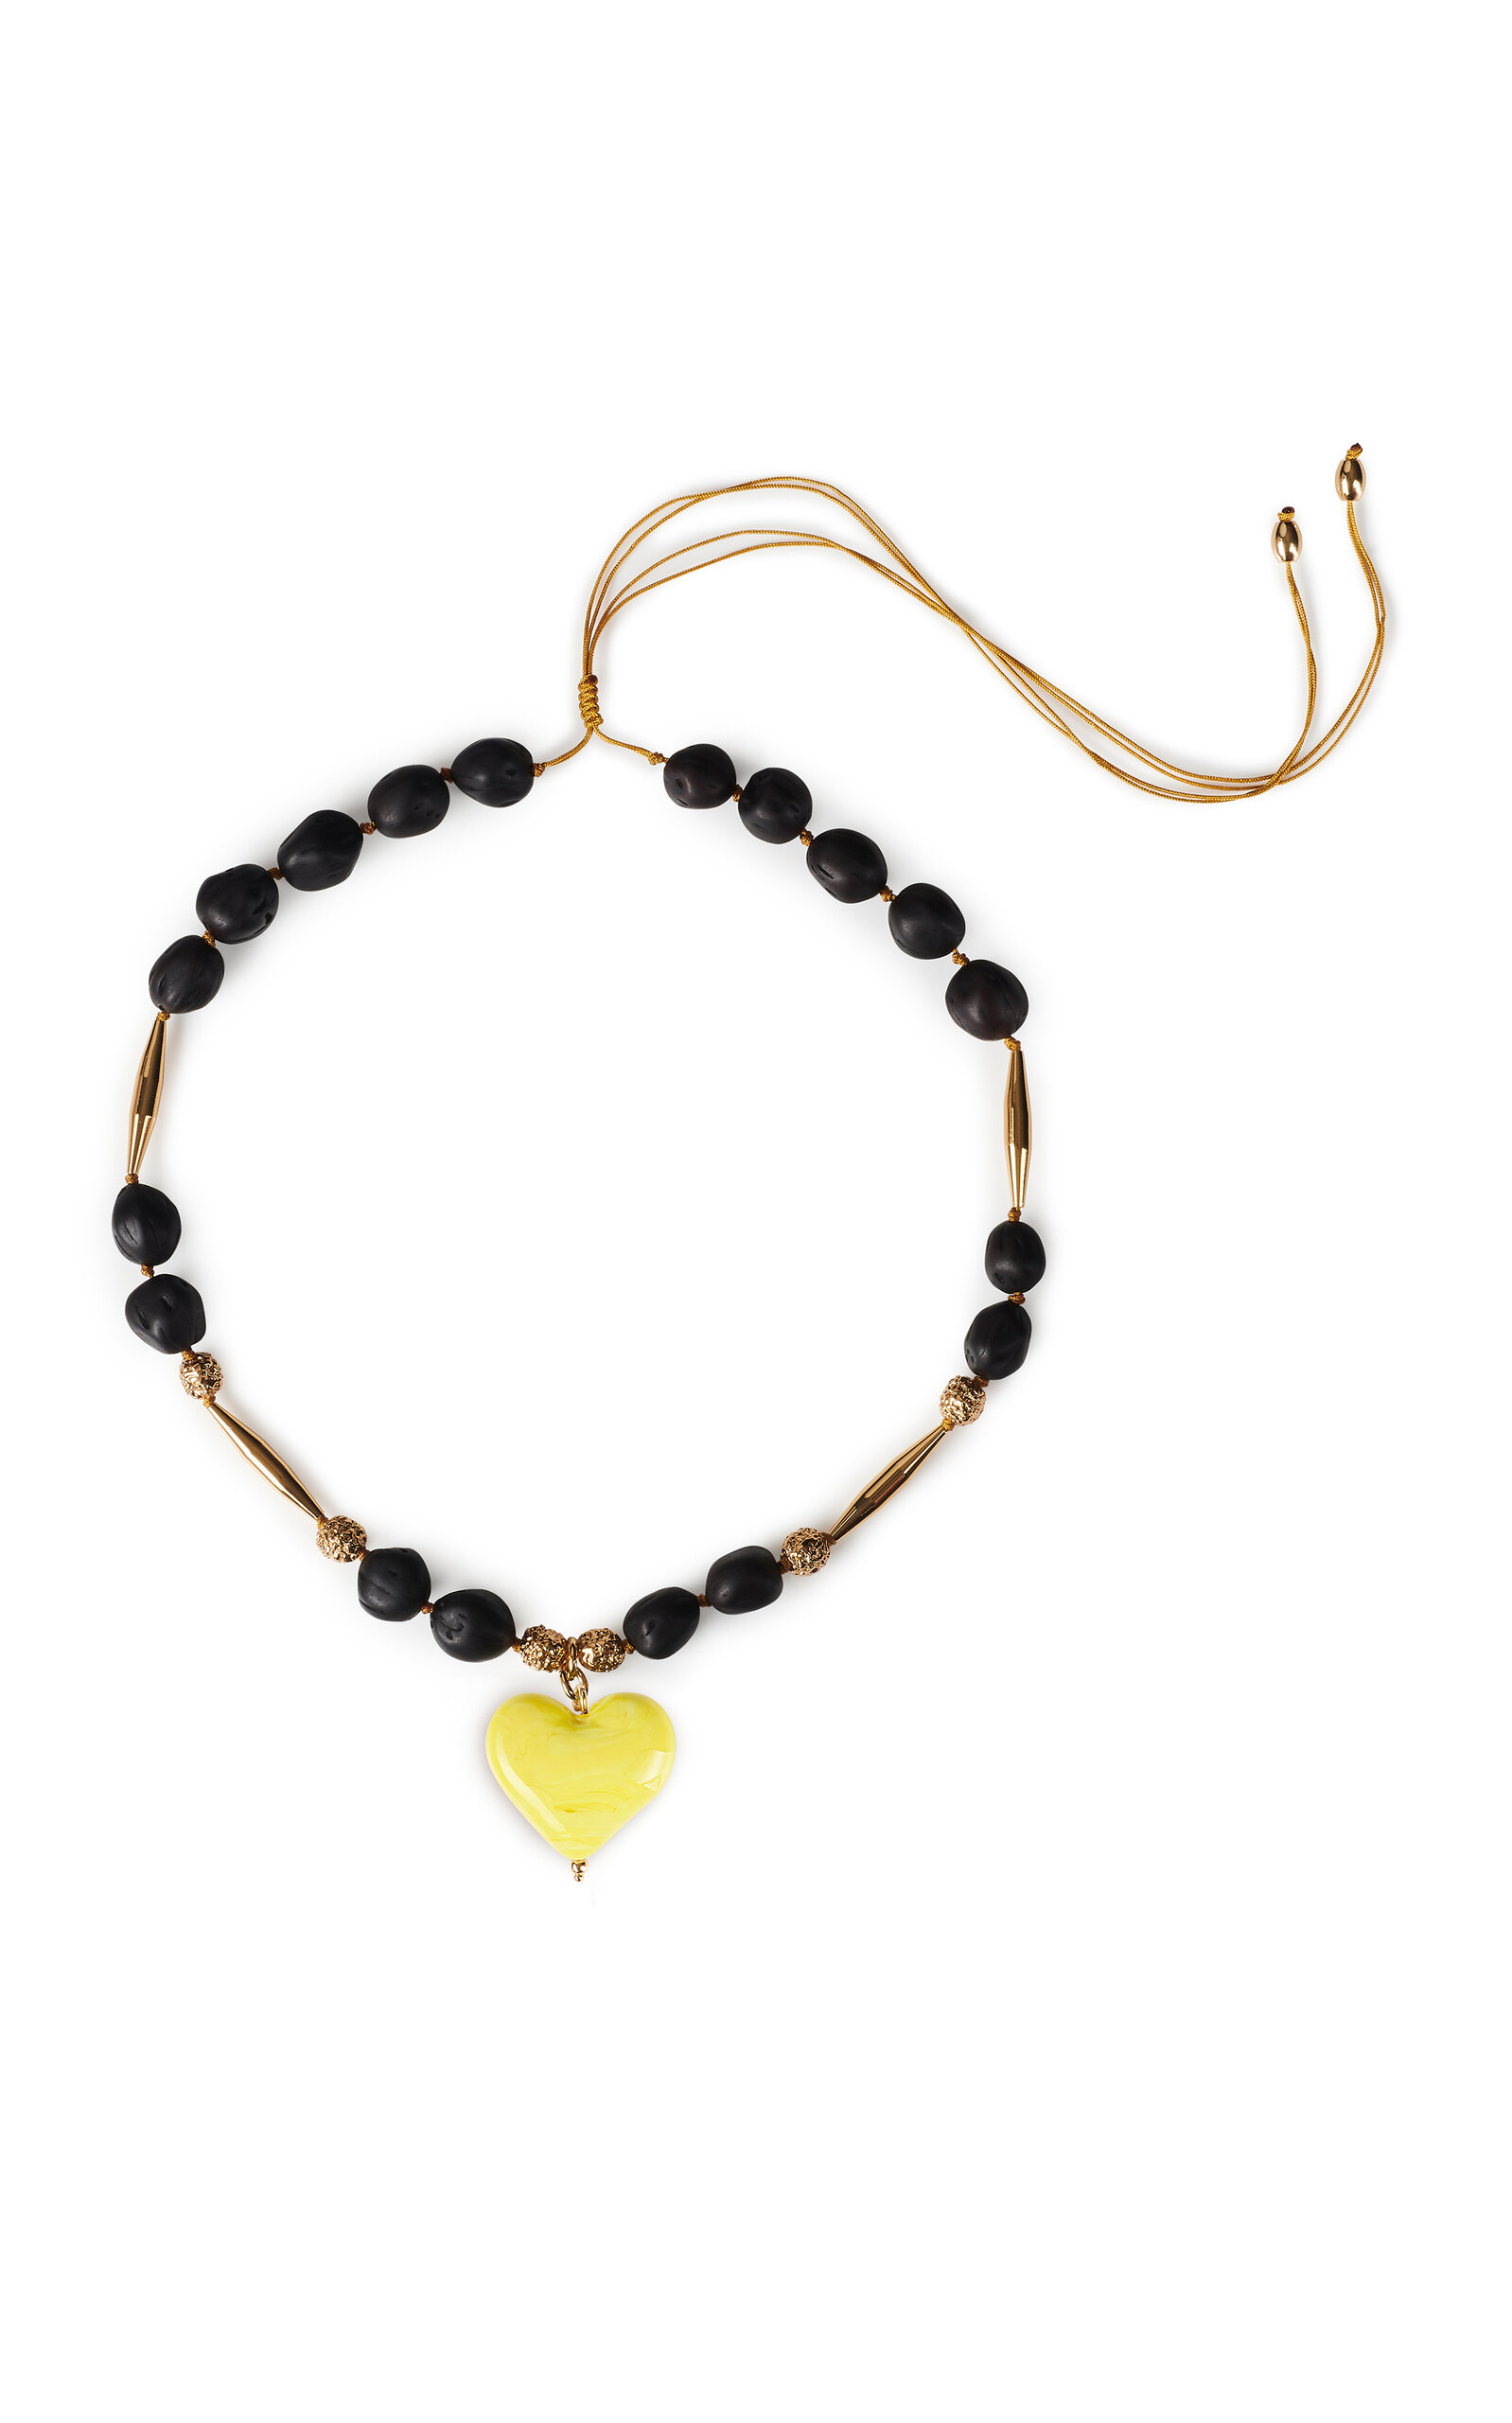 Cuore Resort Wooden Beads and 24k Gold-Plated Pendant Necklace